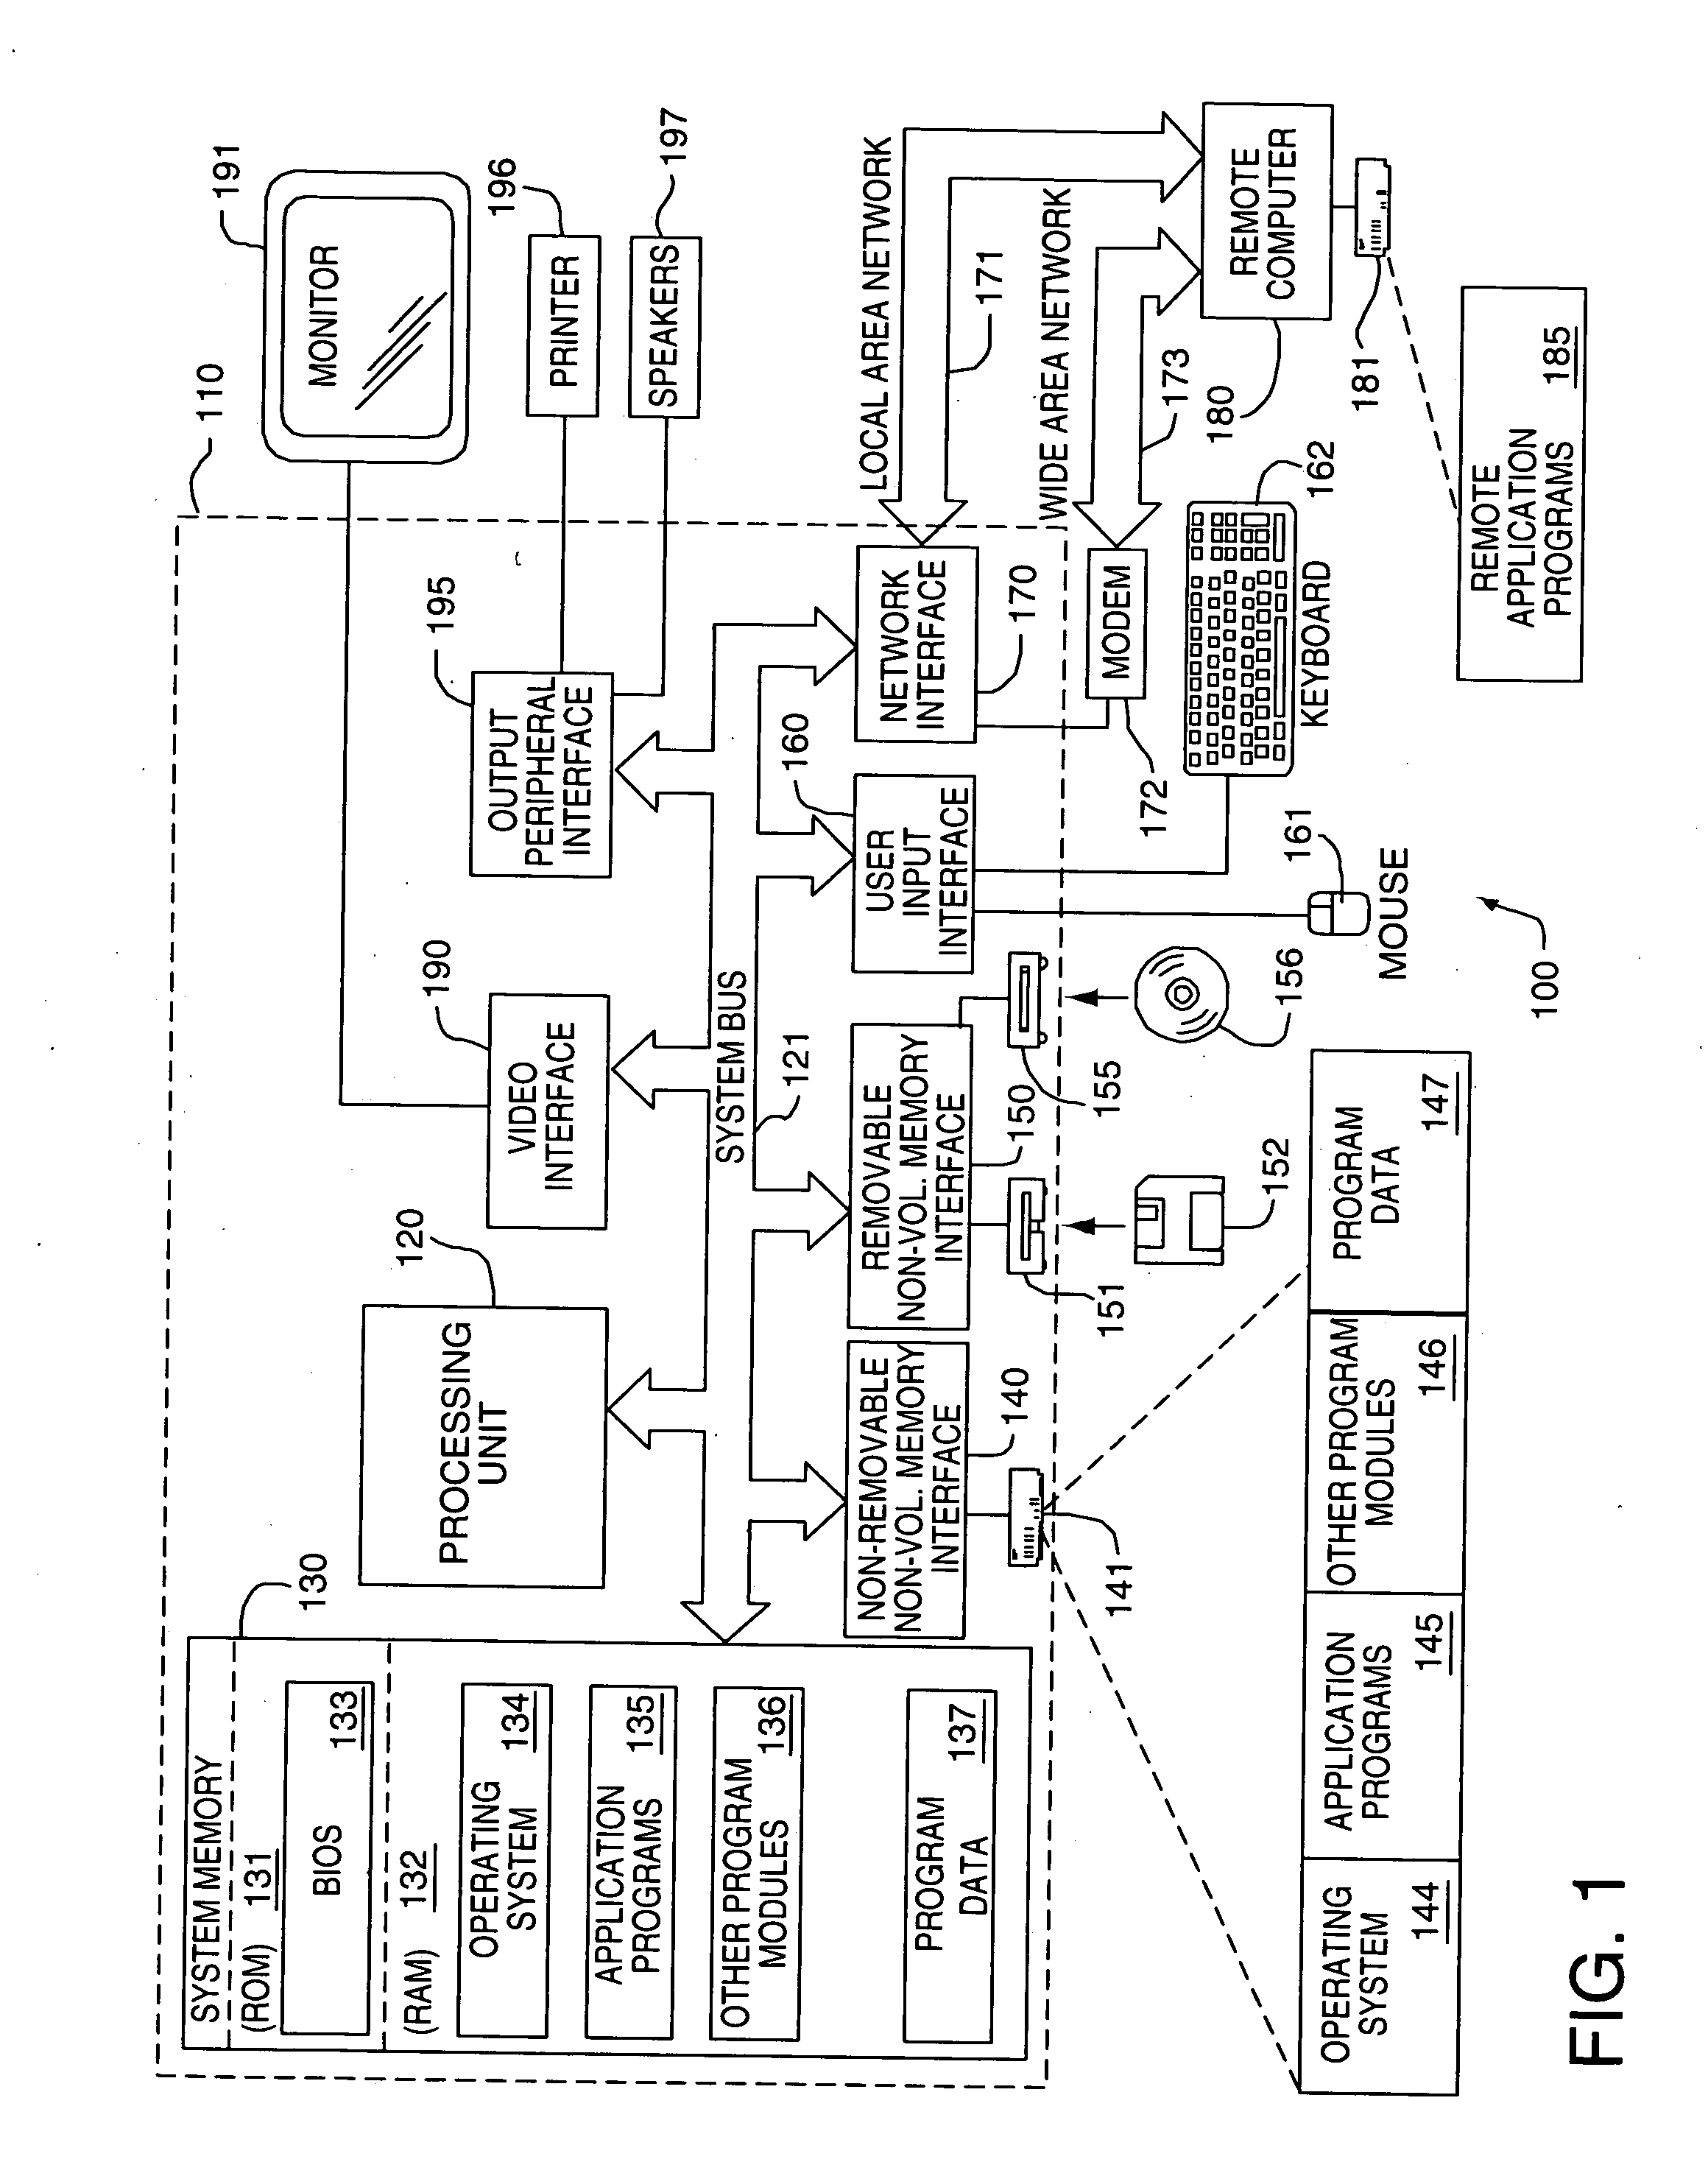 Self-learning method and system for detecting abnormalities